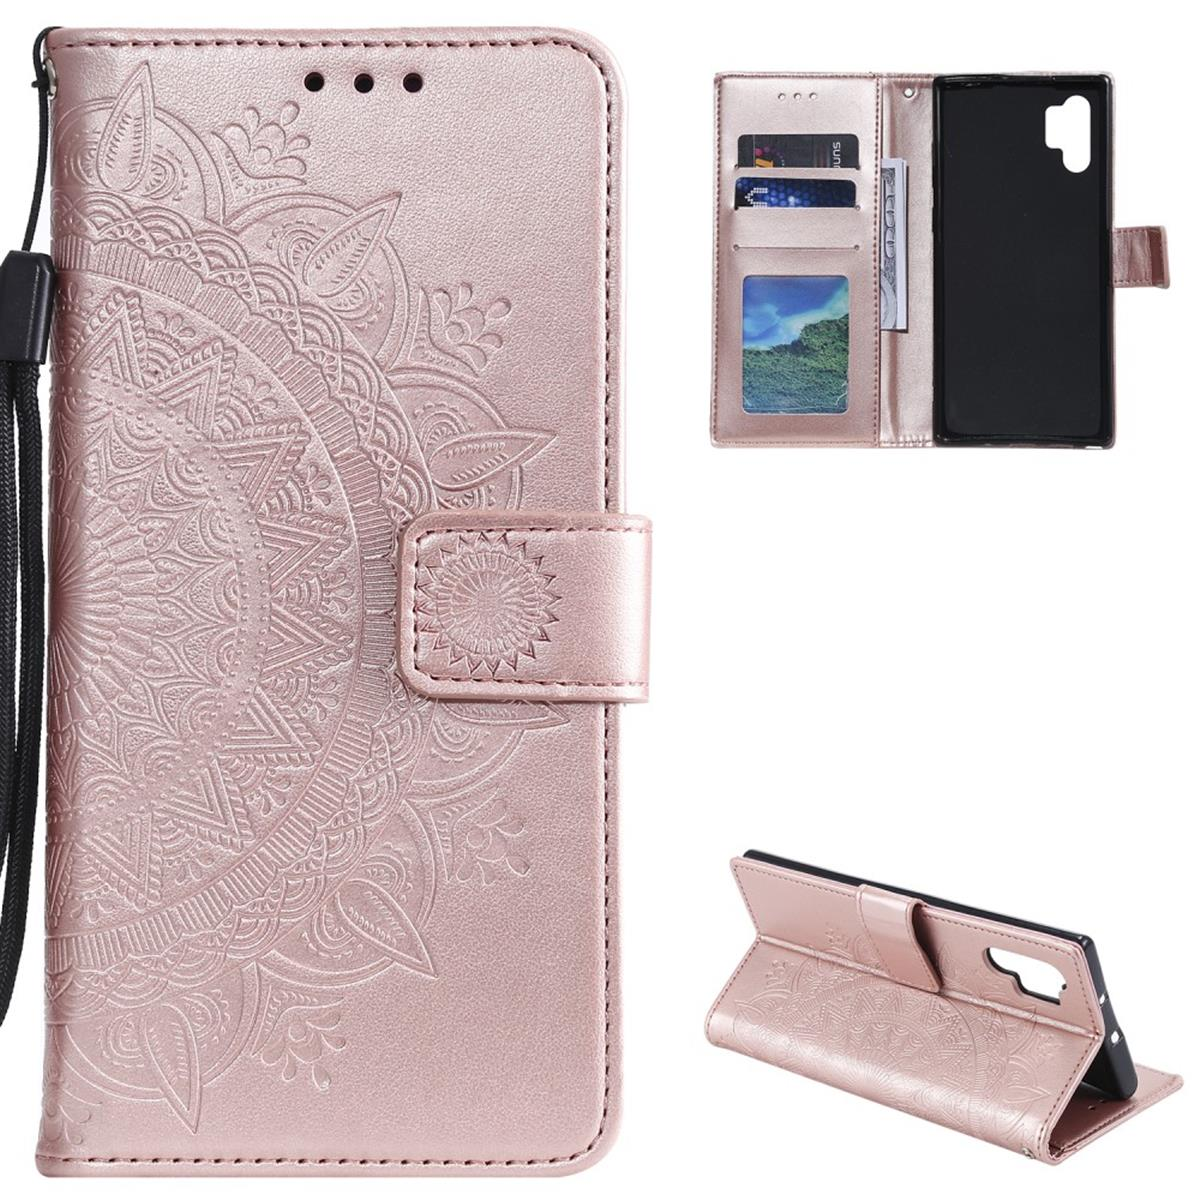 Muster, Samsung, Roségold mit Bookcover, COVERKINGZ Mandala 4G, A32 Galaxy Klapphülle